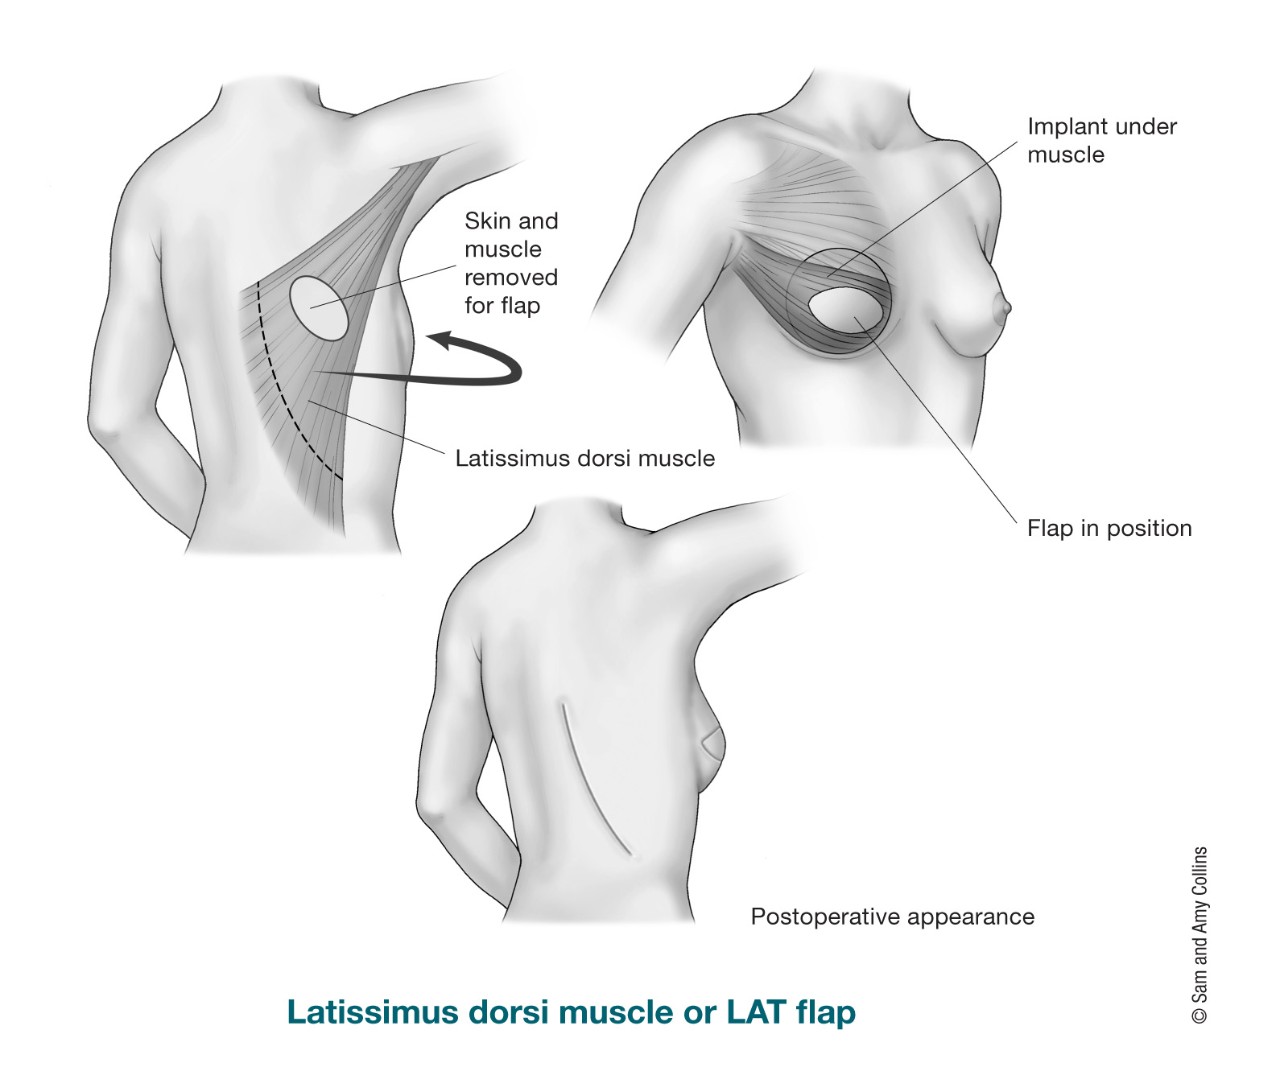 illustration showing the latissimus dorsi muscle and the skin and muscle removed for LAT flap. also shows the implant under muscle in the breast, the flap in position and the postoperative appearance